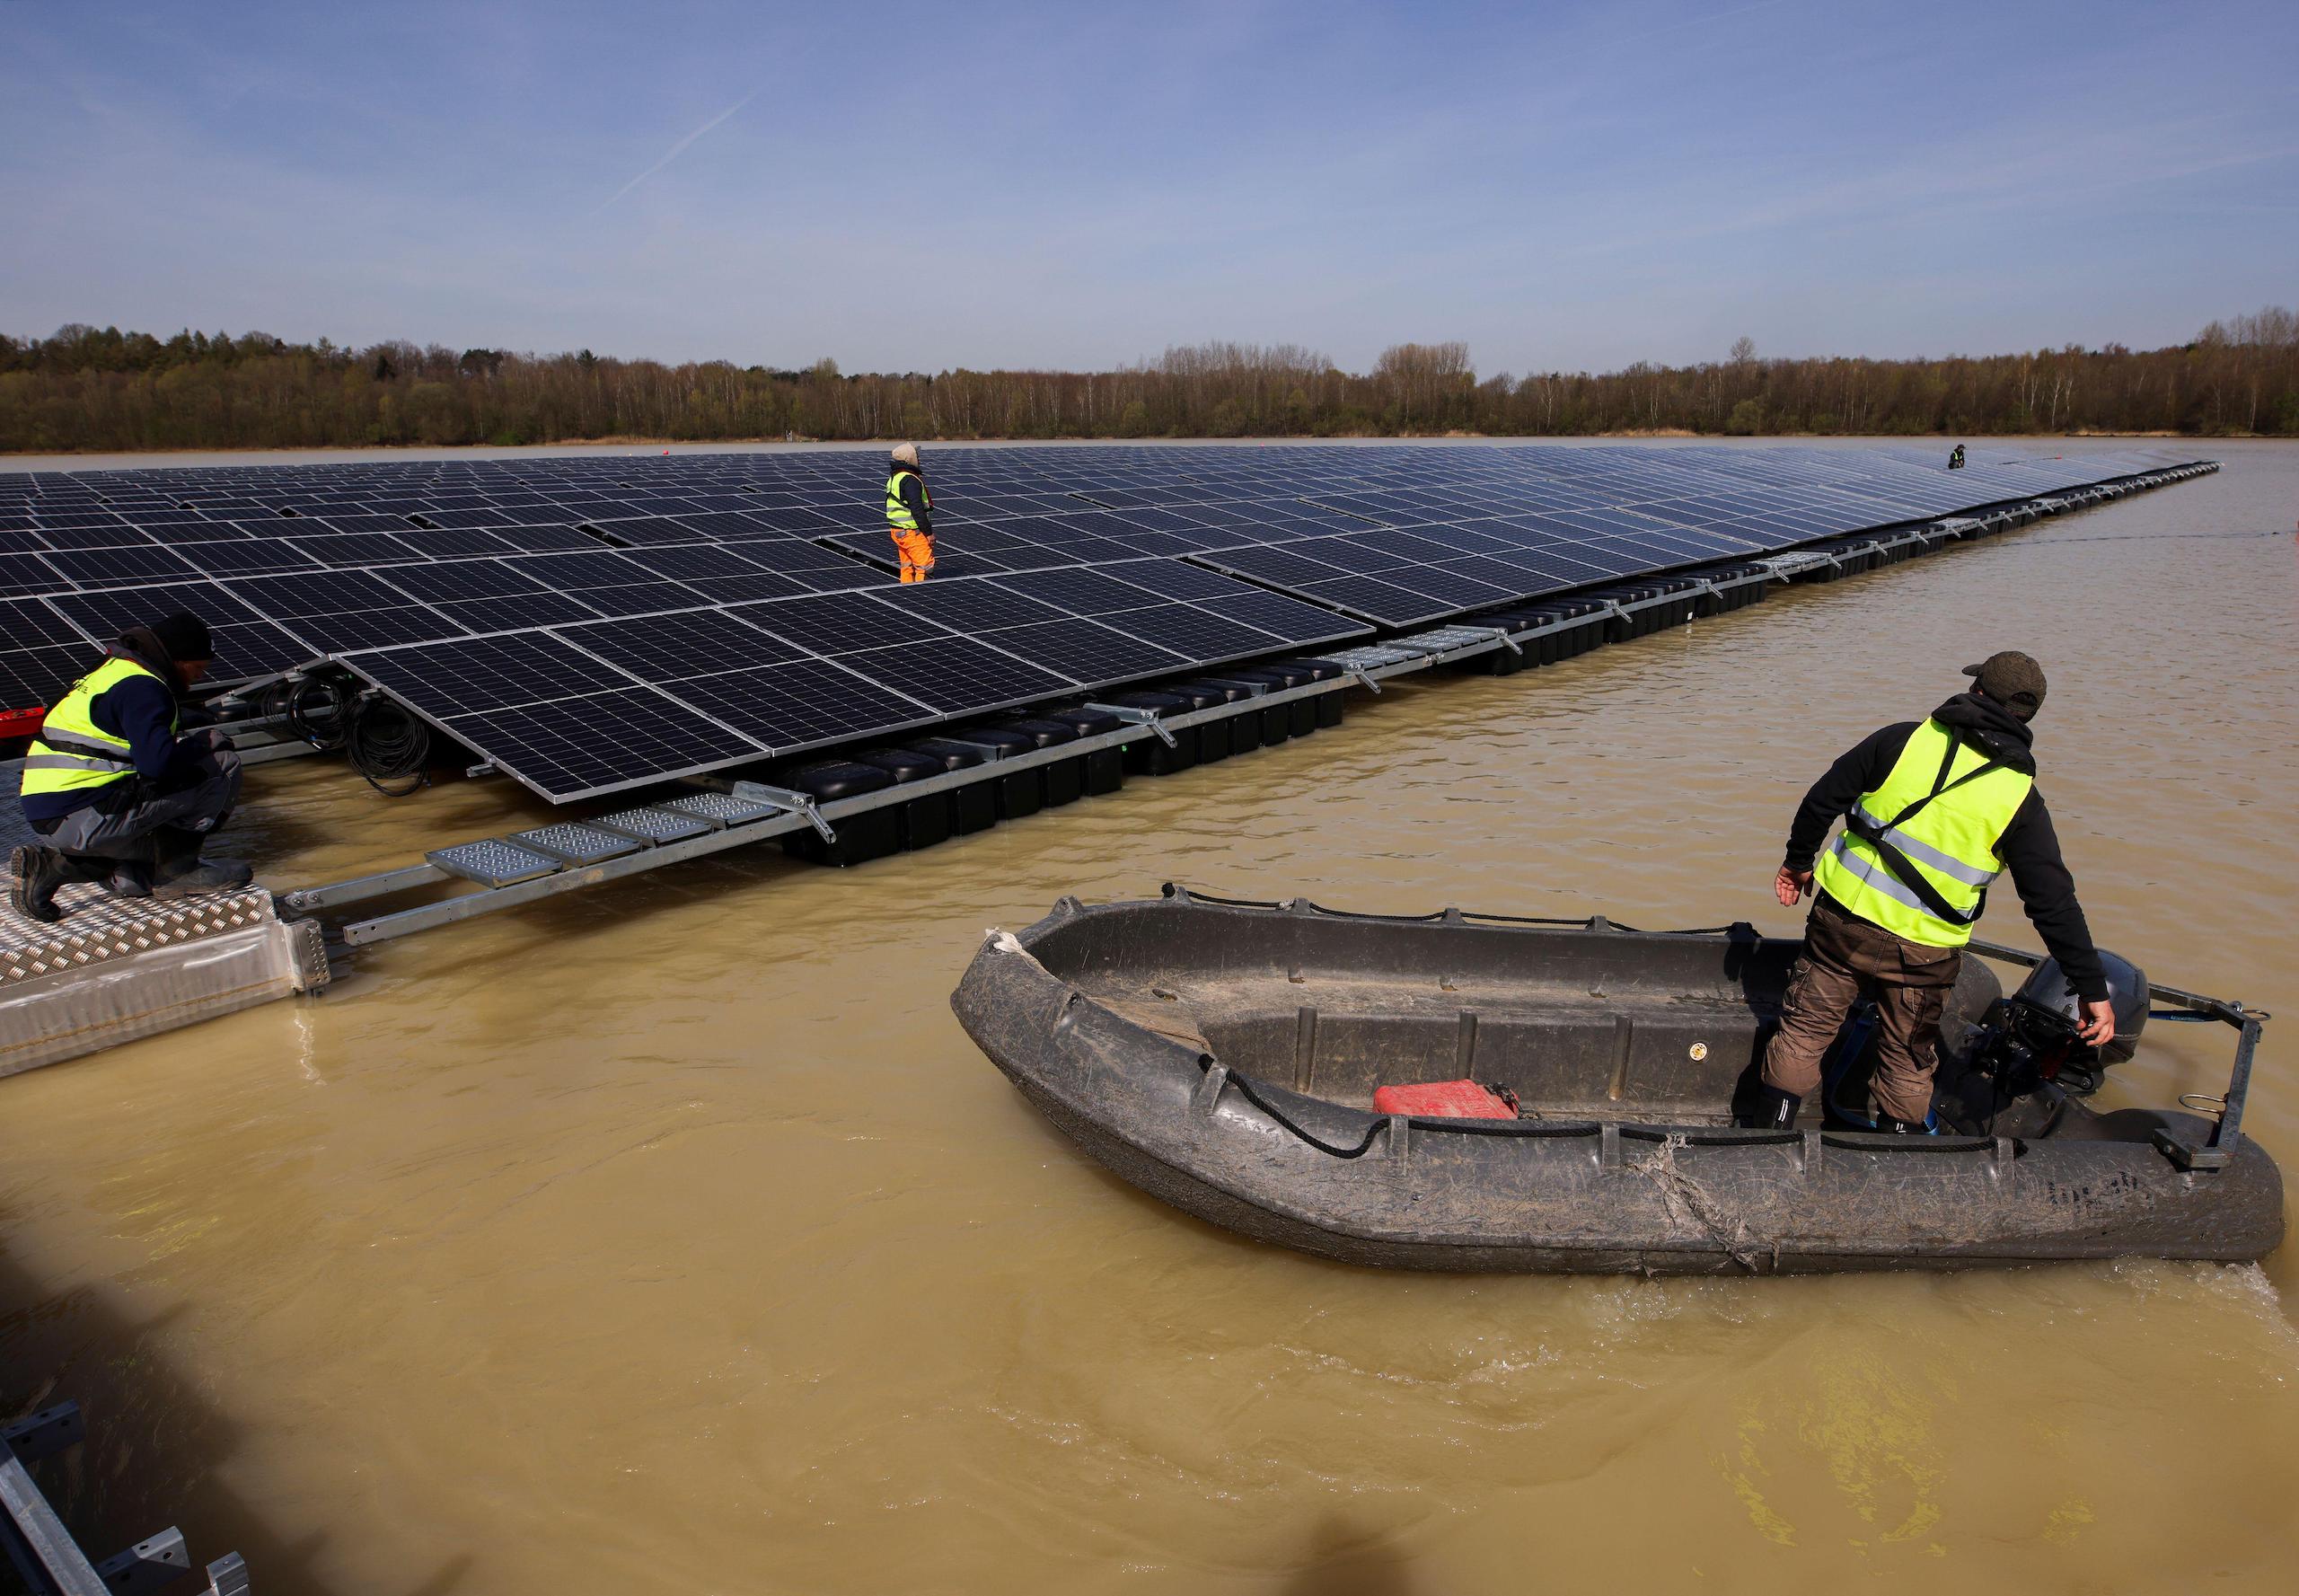 <p>Floating solar panels are installed on Lake Silbersee, Germany, earlier this year. Floating solar has been deployed in Europe and east Asia for <a href="https://dialogue.earth/en/energy/floating-solar-ready-for-take-off/">nearly a decade</a>, and interest is now growing in India as the country scrambles to meet its renewable energy targets. (Image: Thilo Schmuelgen / Alamy)</p>